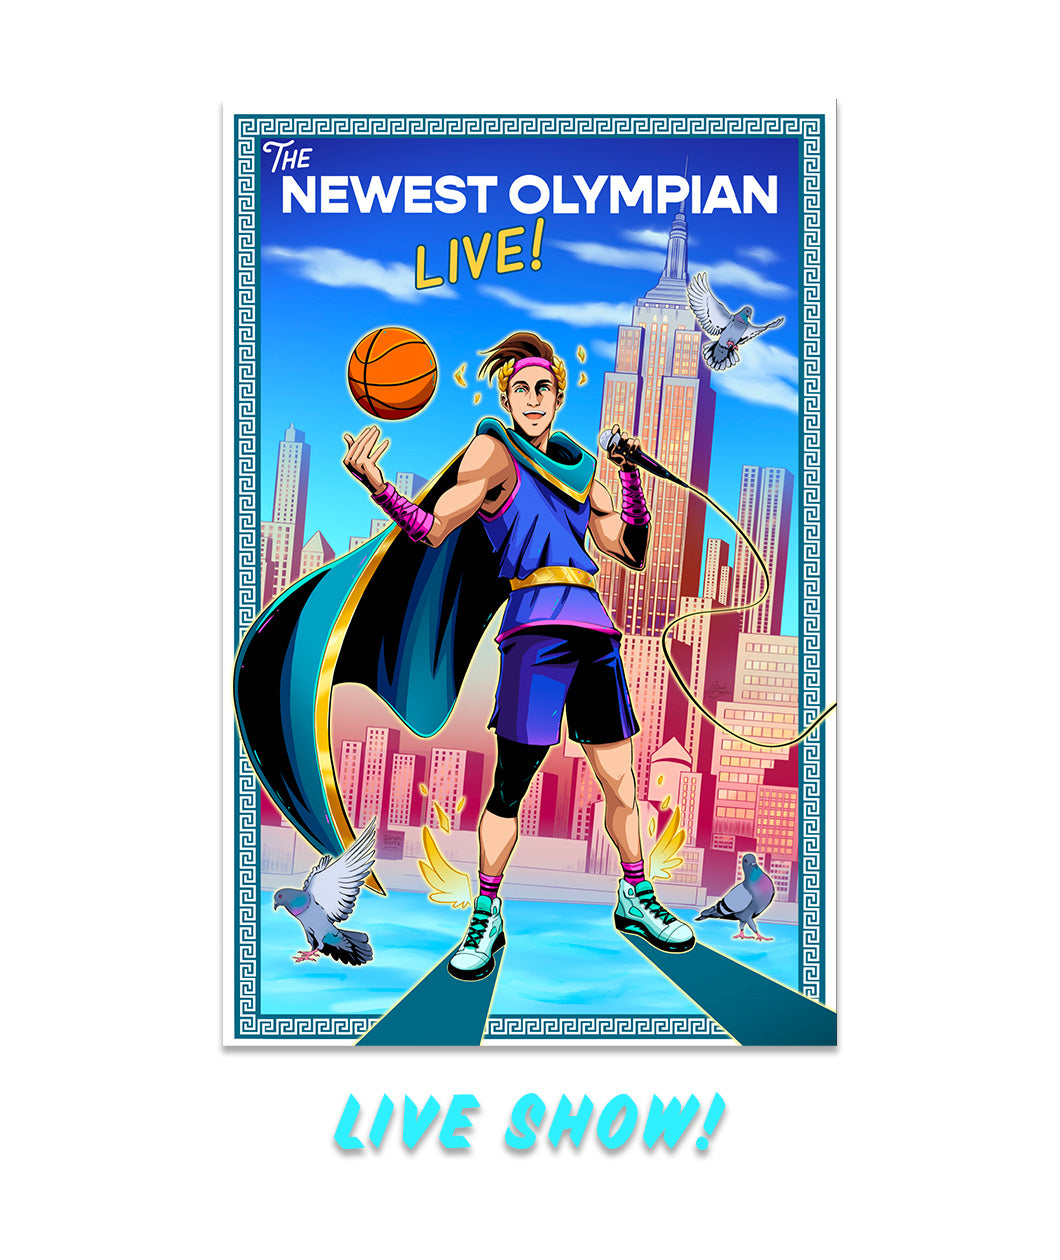 An image for the Newest Olympian Live Show showing someone holding a basketball, in front of skyscrapers, with a cape and pigeons flying around. 